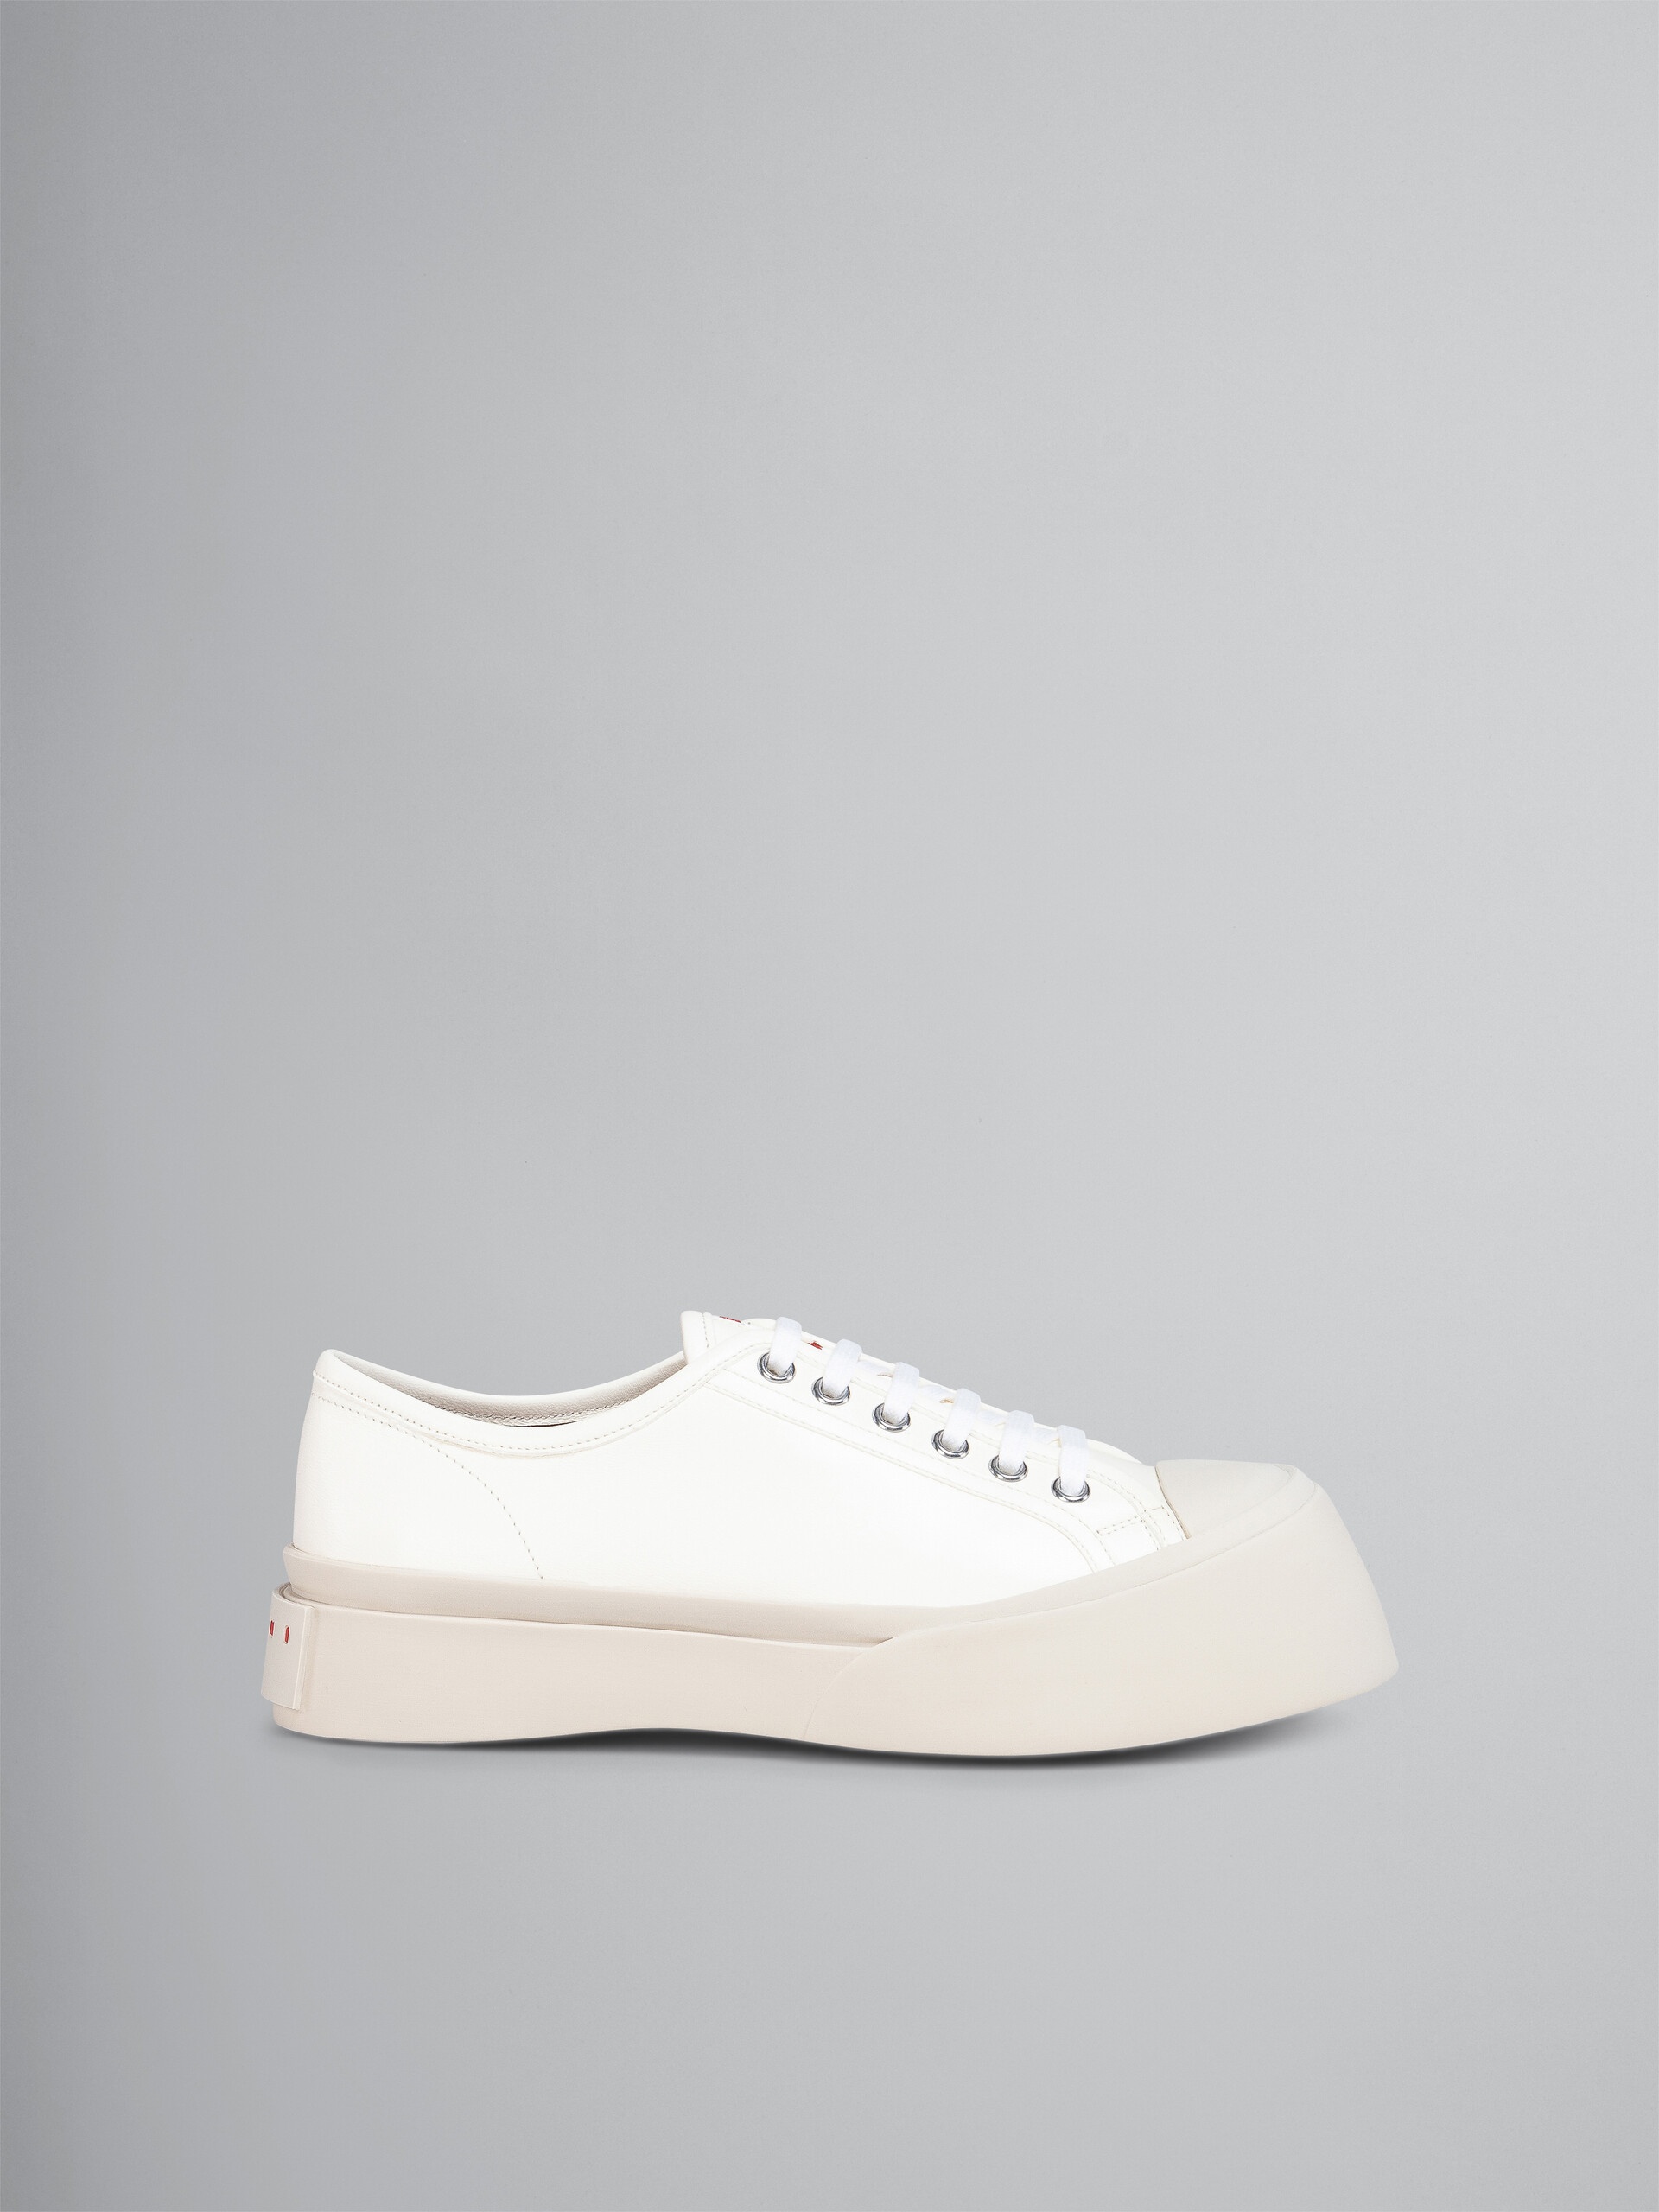 WHITE NAPPA LEATHER PABLO LACE-UP SNEAKER - 1